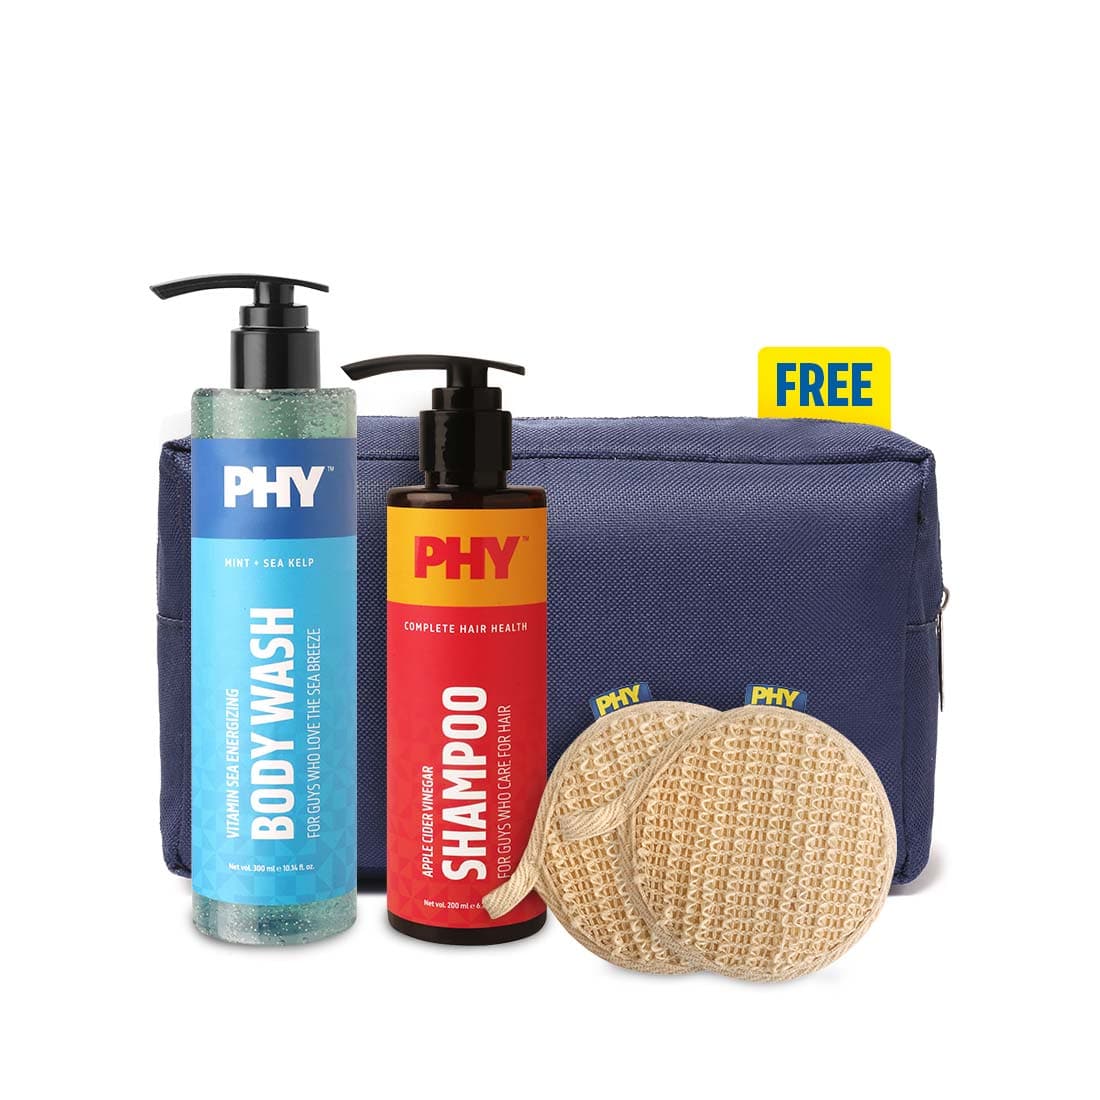 

PHY Power Shower Duo